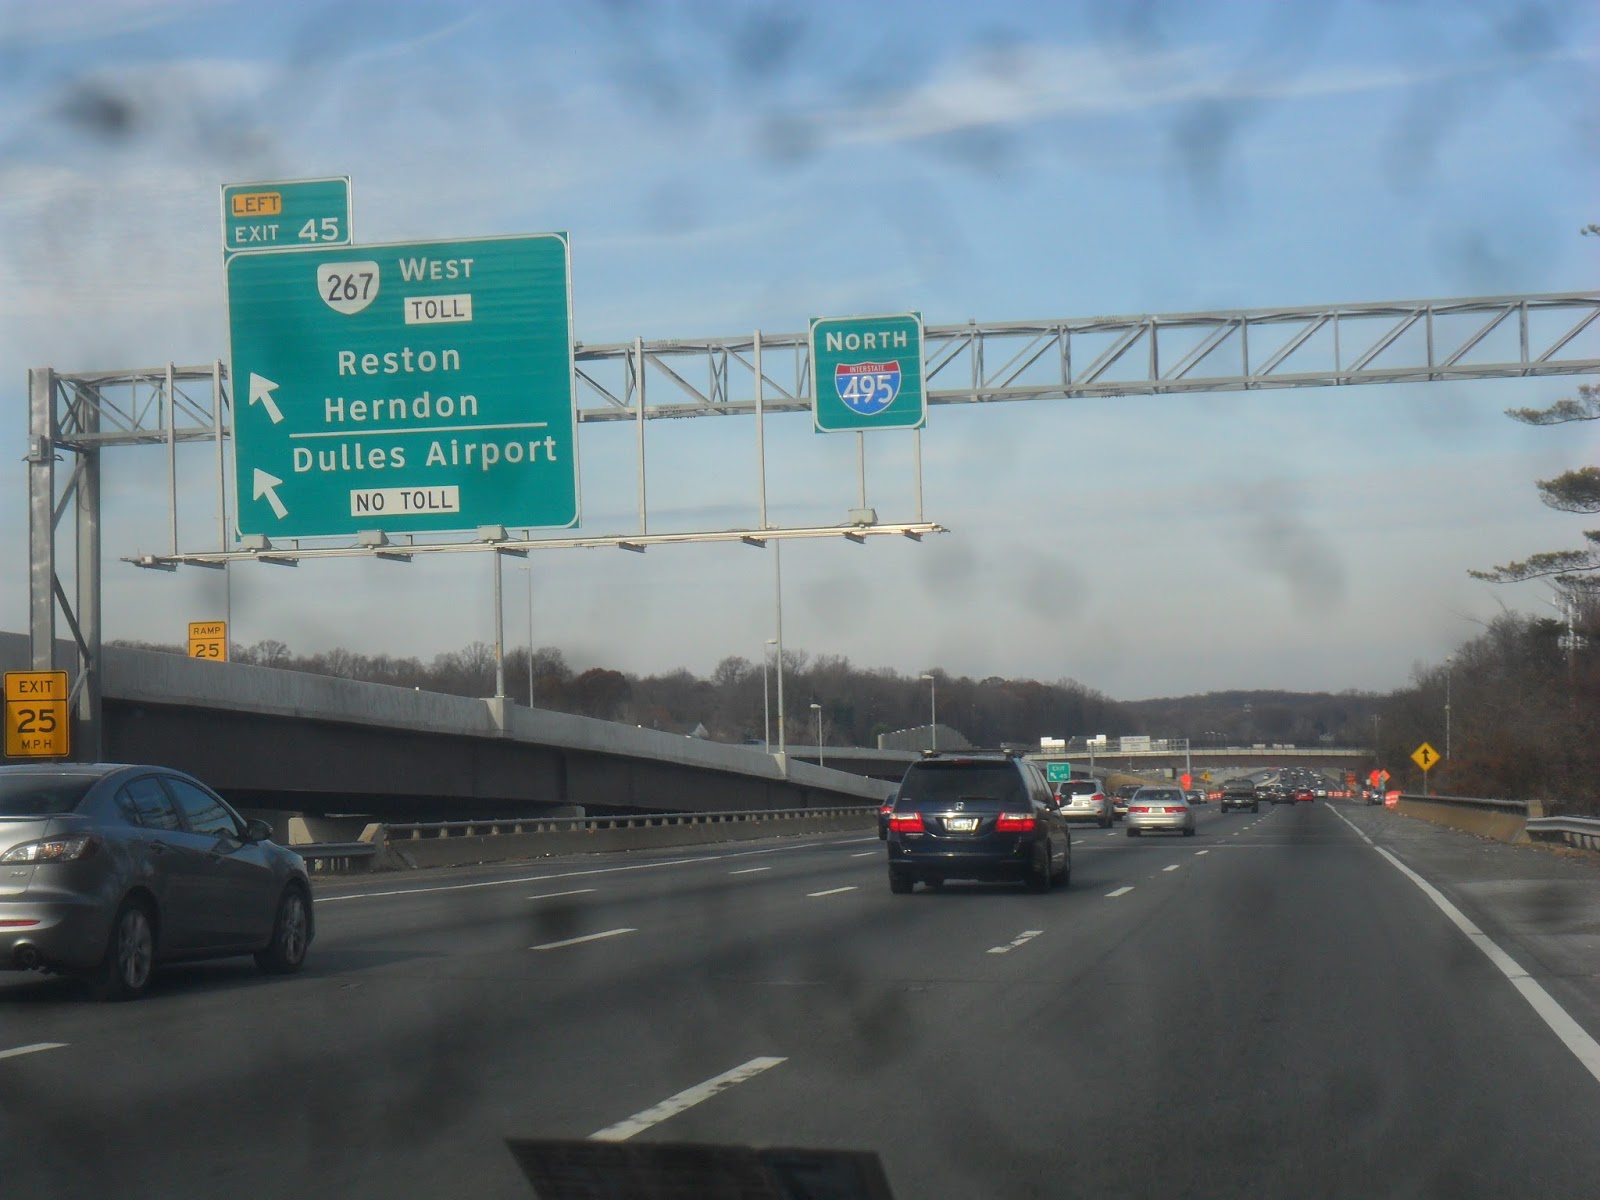 Luke S Signs I Capital Beltway Fairfax County VA Between Route And The Maryland